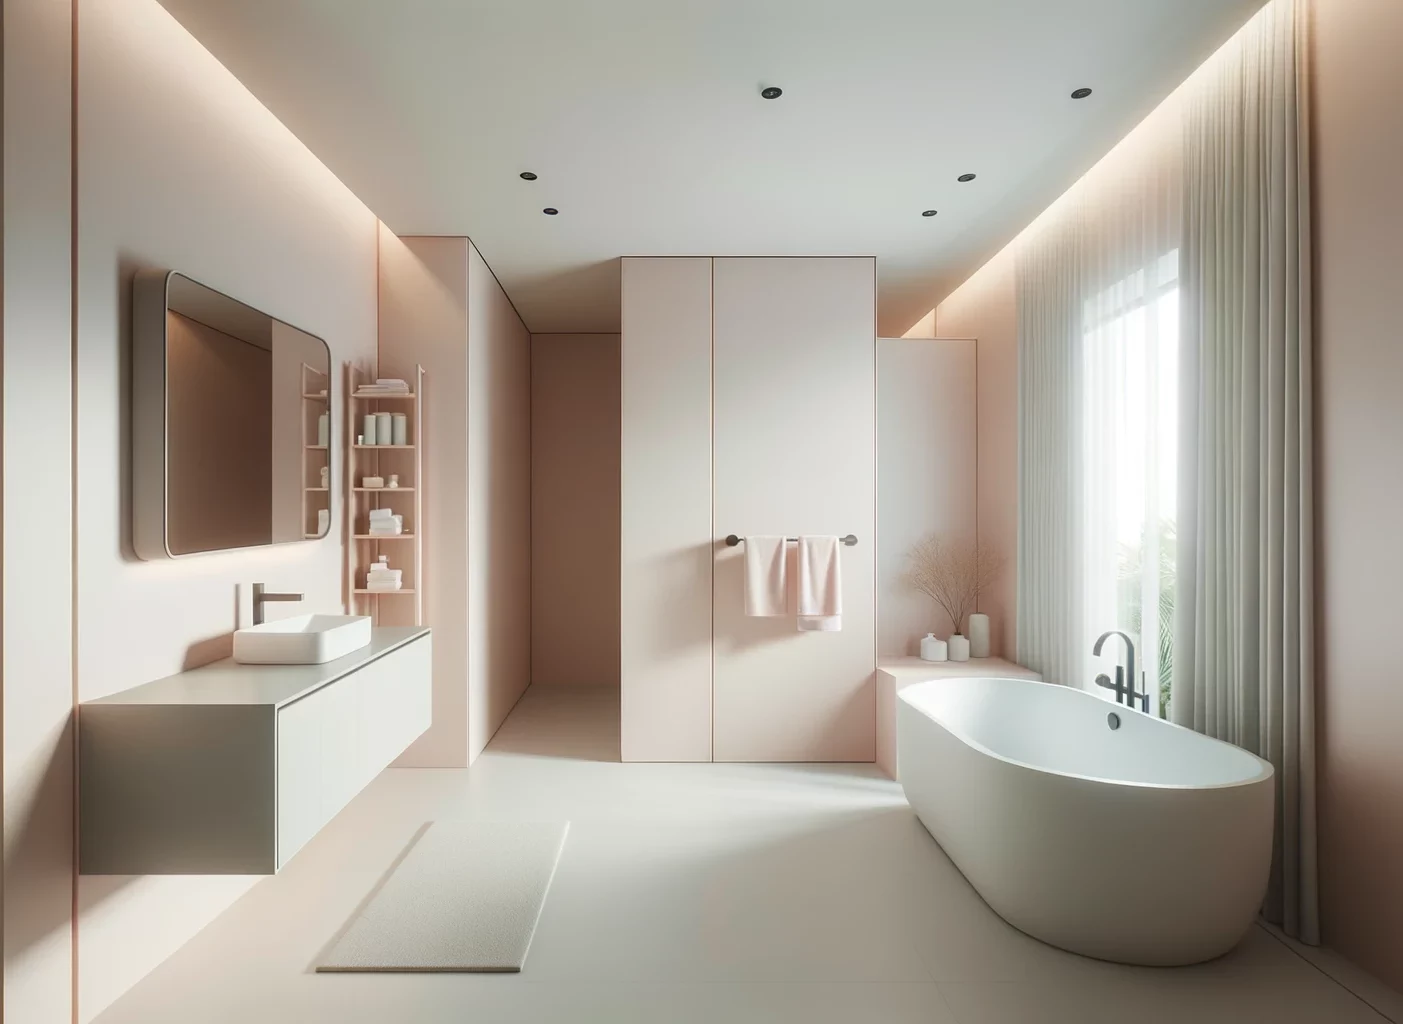 How Much Does It Really Cost To Paint A Bathroom?